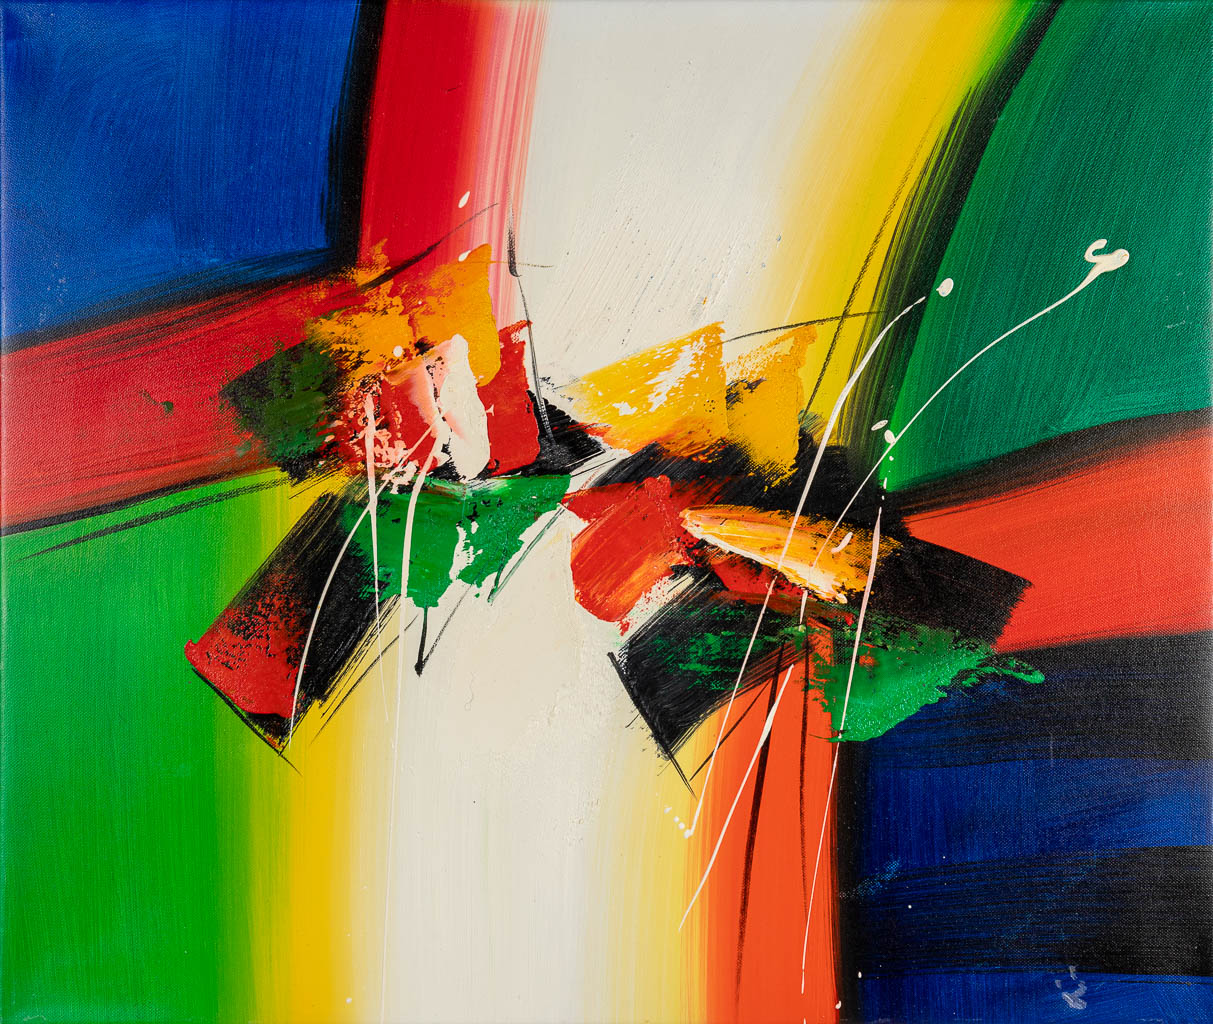 Lee COLE (1954) 'No title' an abstract painting, acrylic on canvas. (65 x 54 cm)